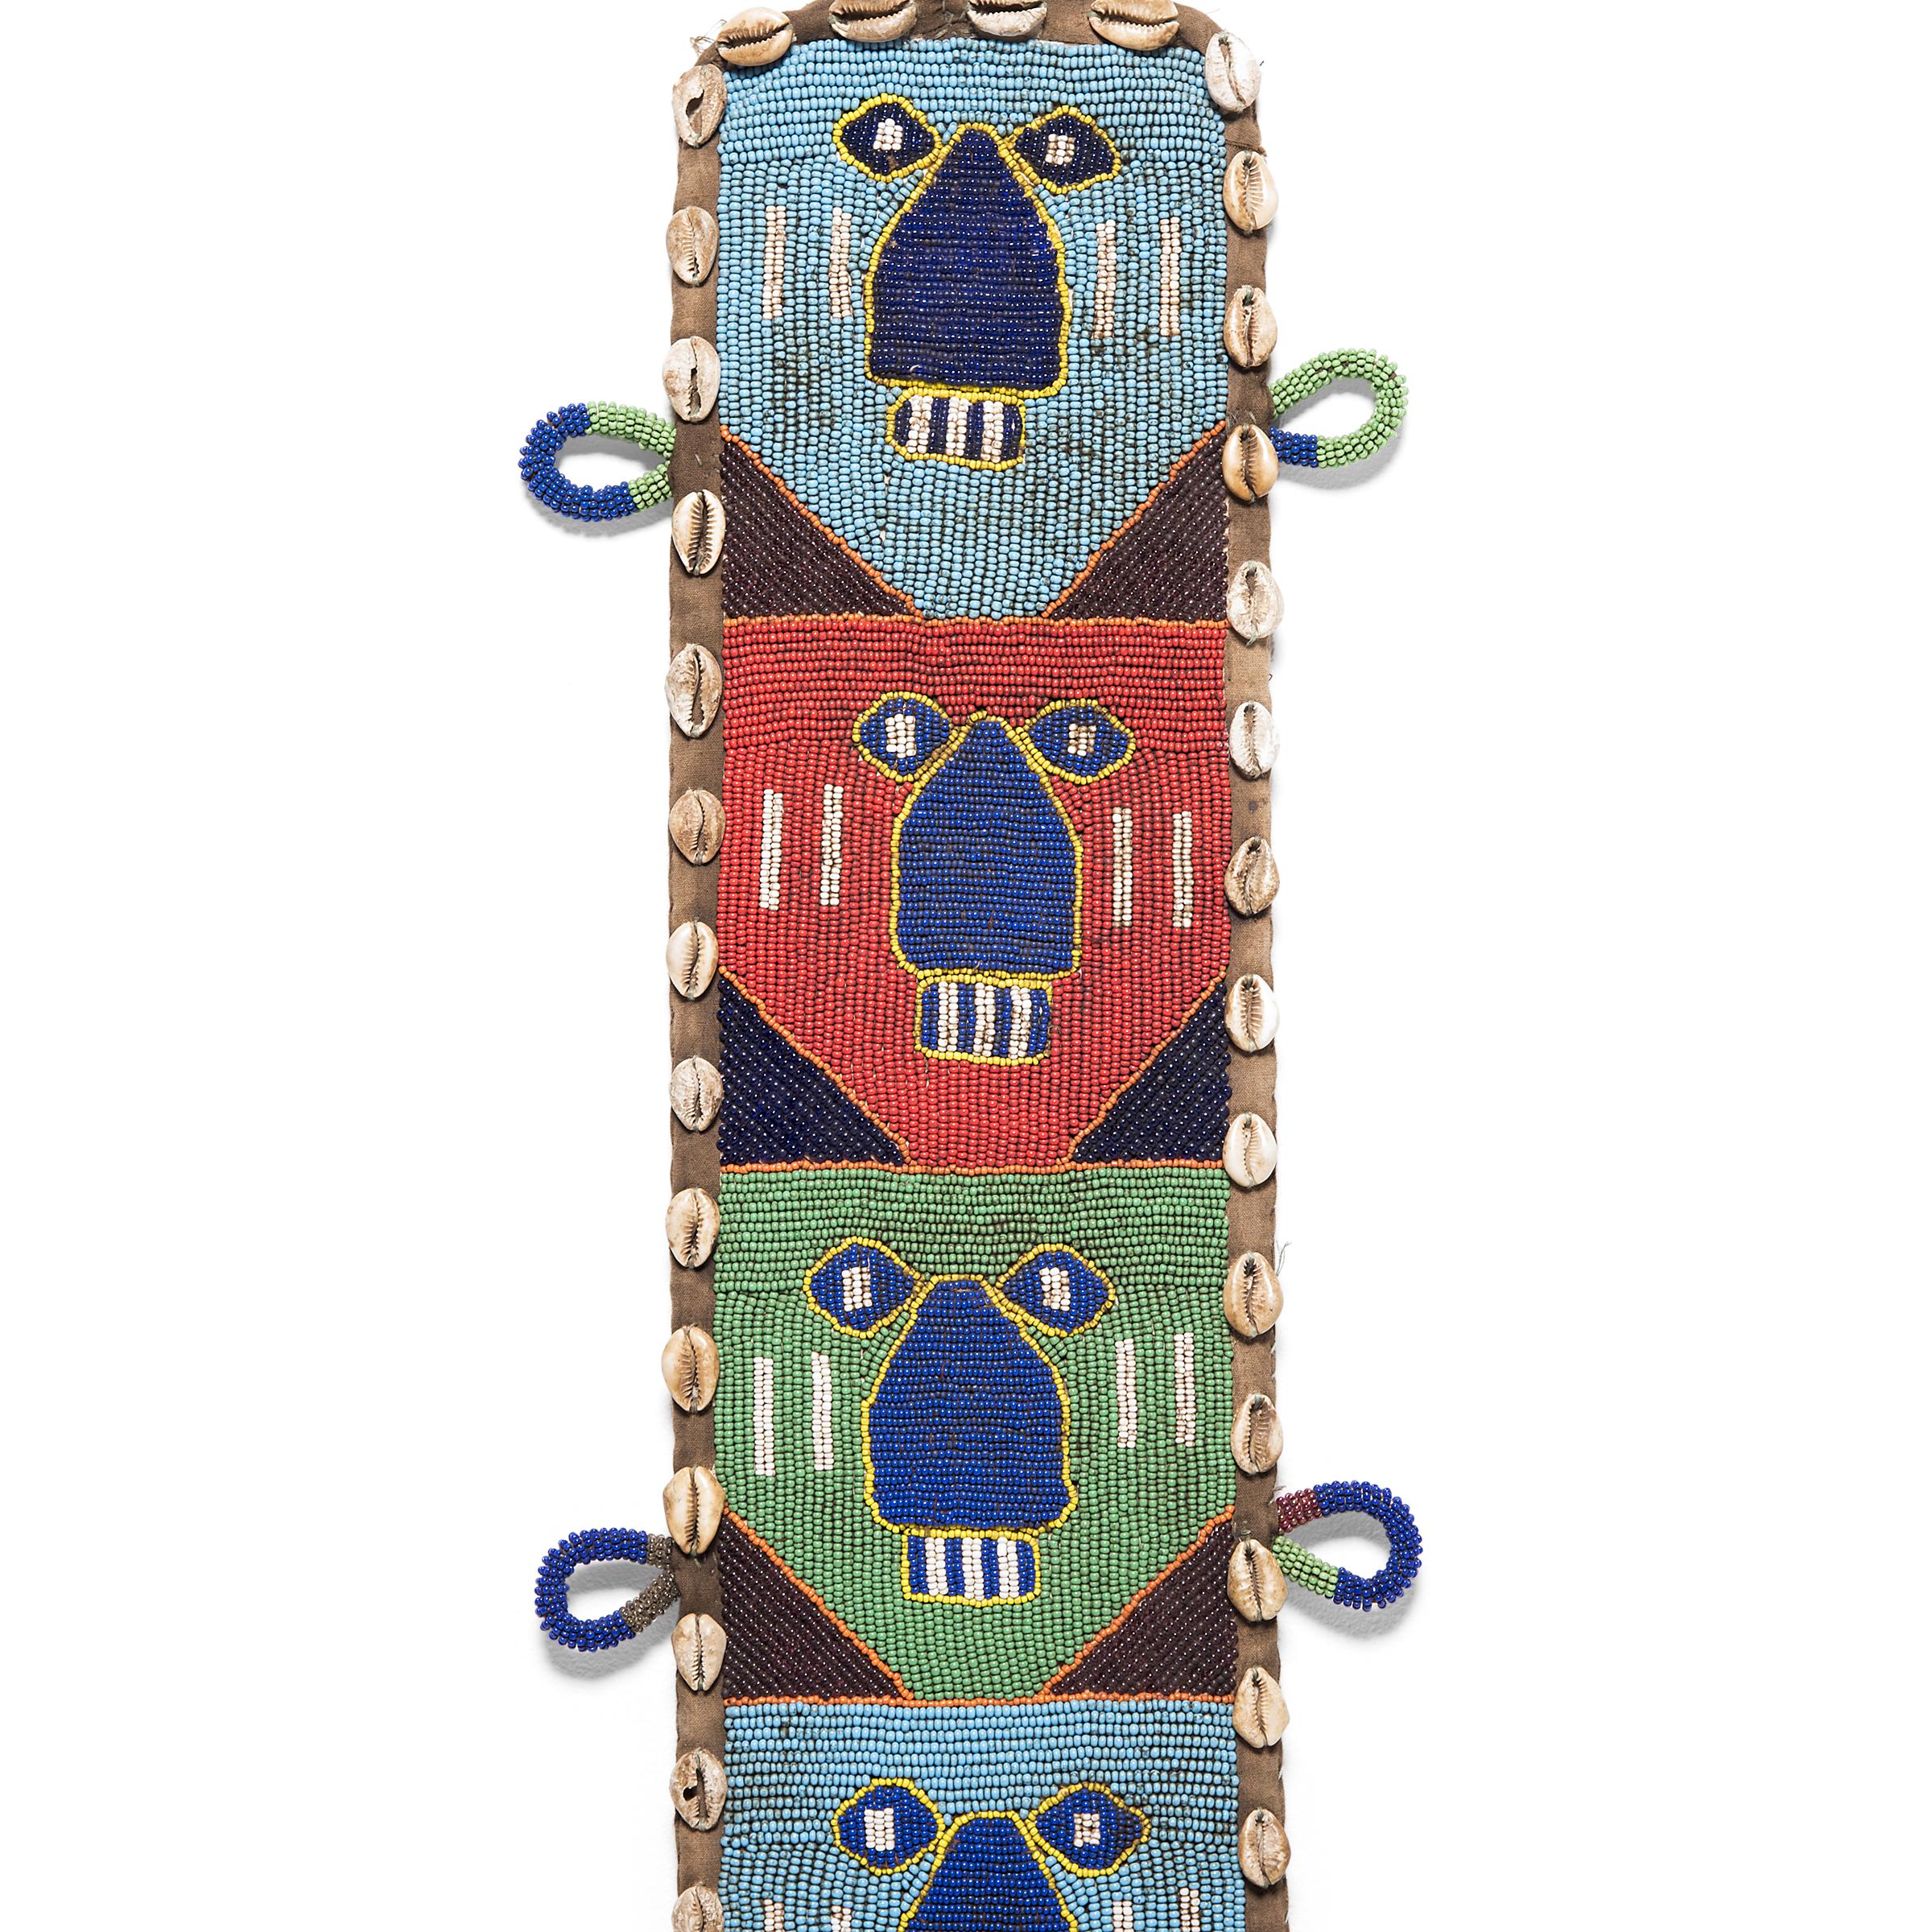 This intricately-constructed colorful train was painstakingly created by Yoruba artisans in Nigeria in the mid-20th century. Recent designs such as this were based upon sashes that signified the owner's spiritual position within the community and